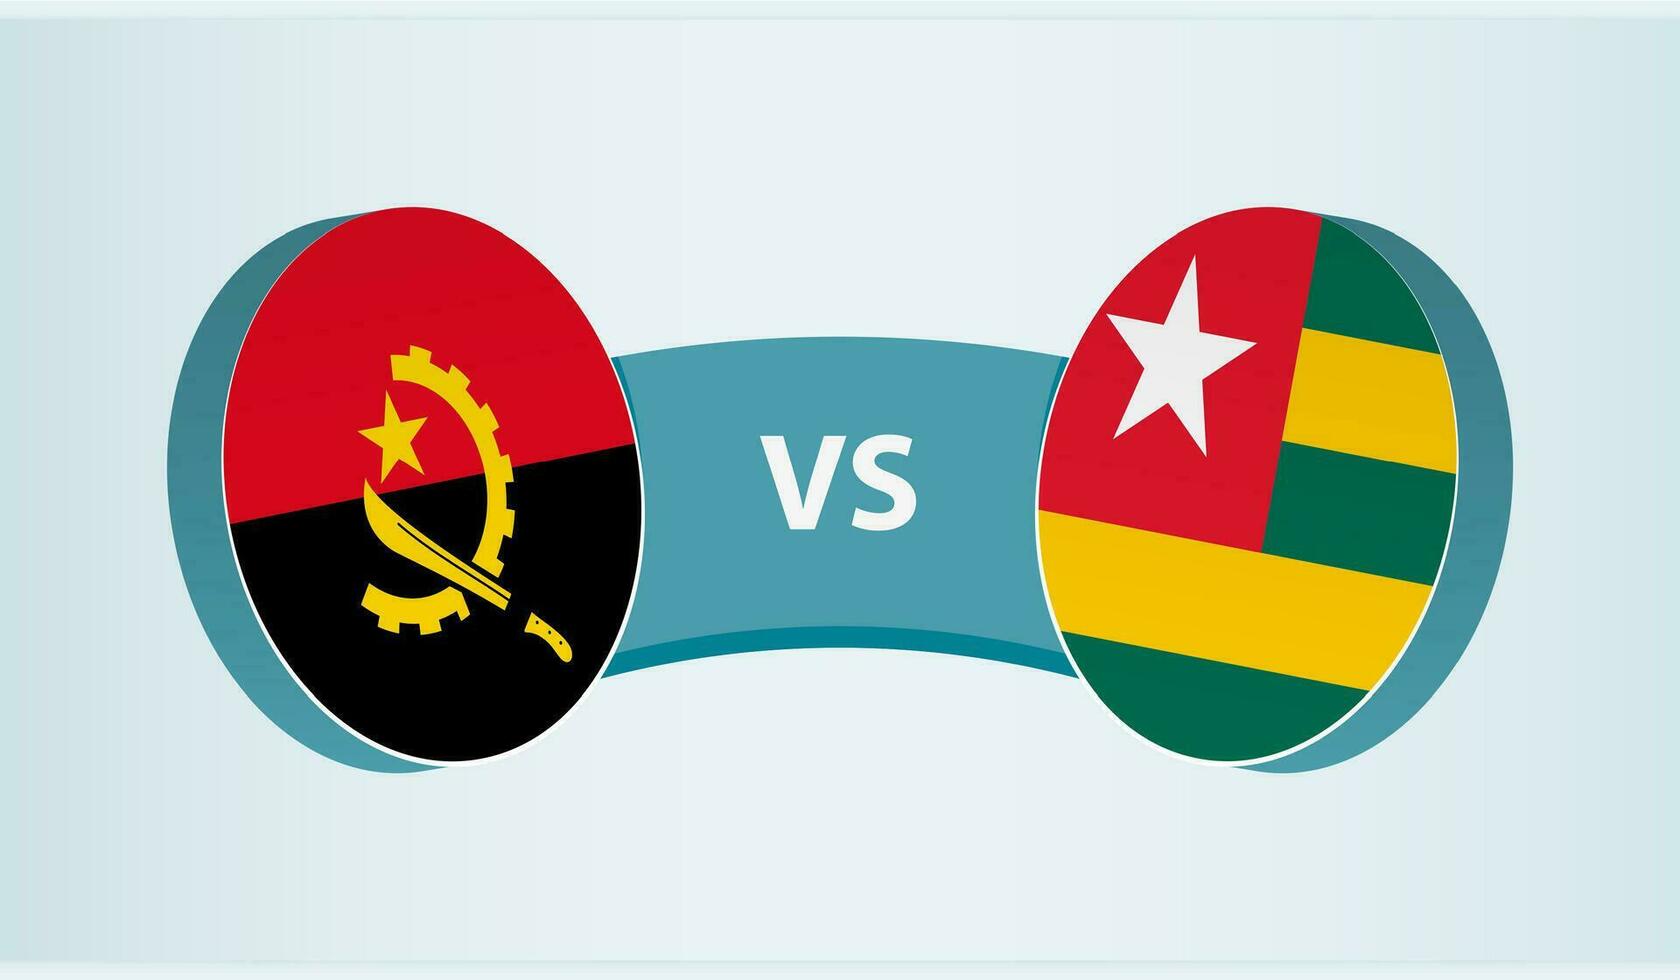 Angola versus Togo, team sports competition concept. vector